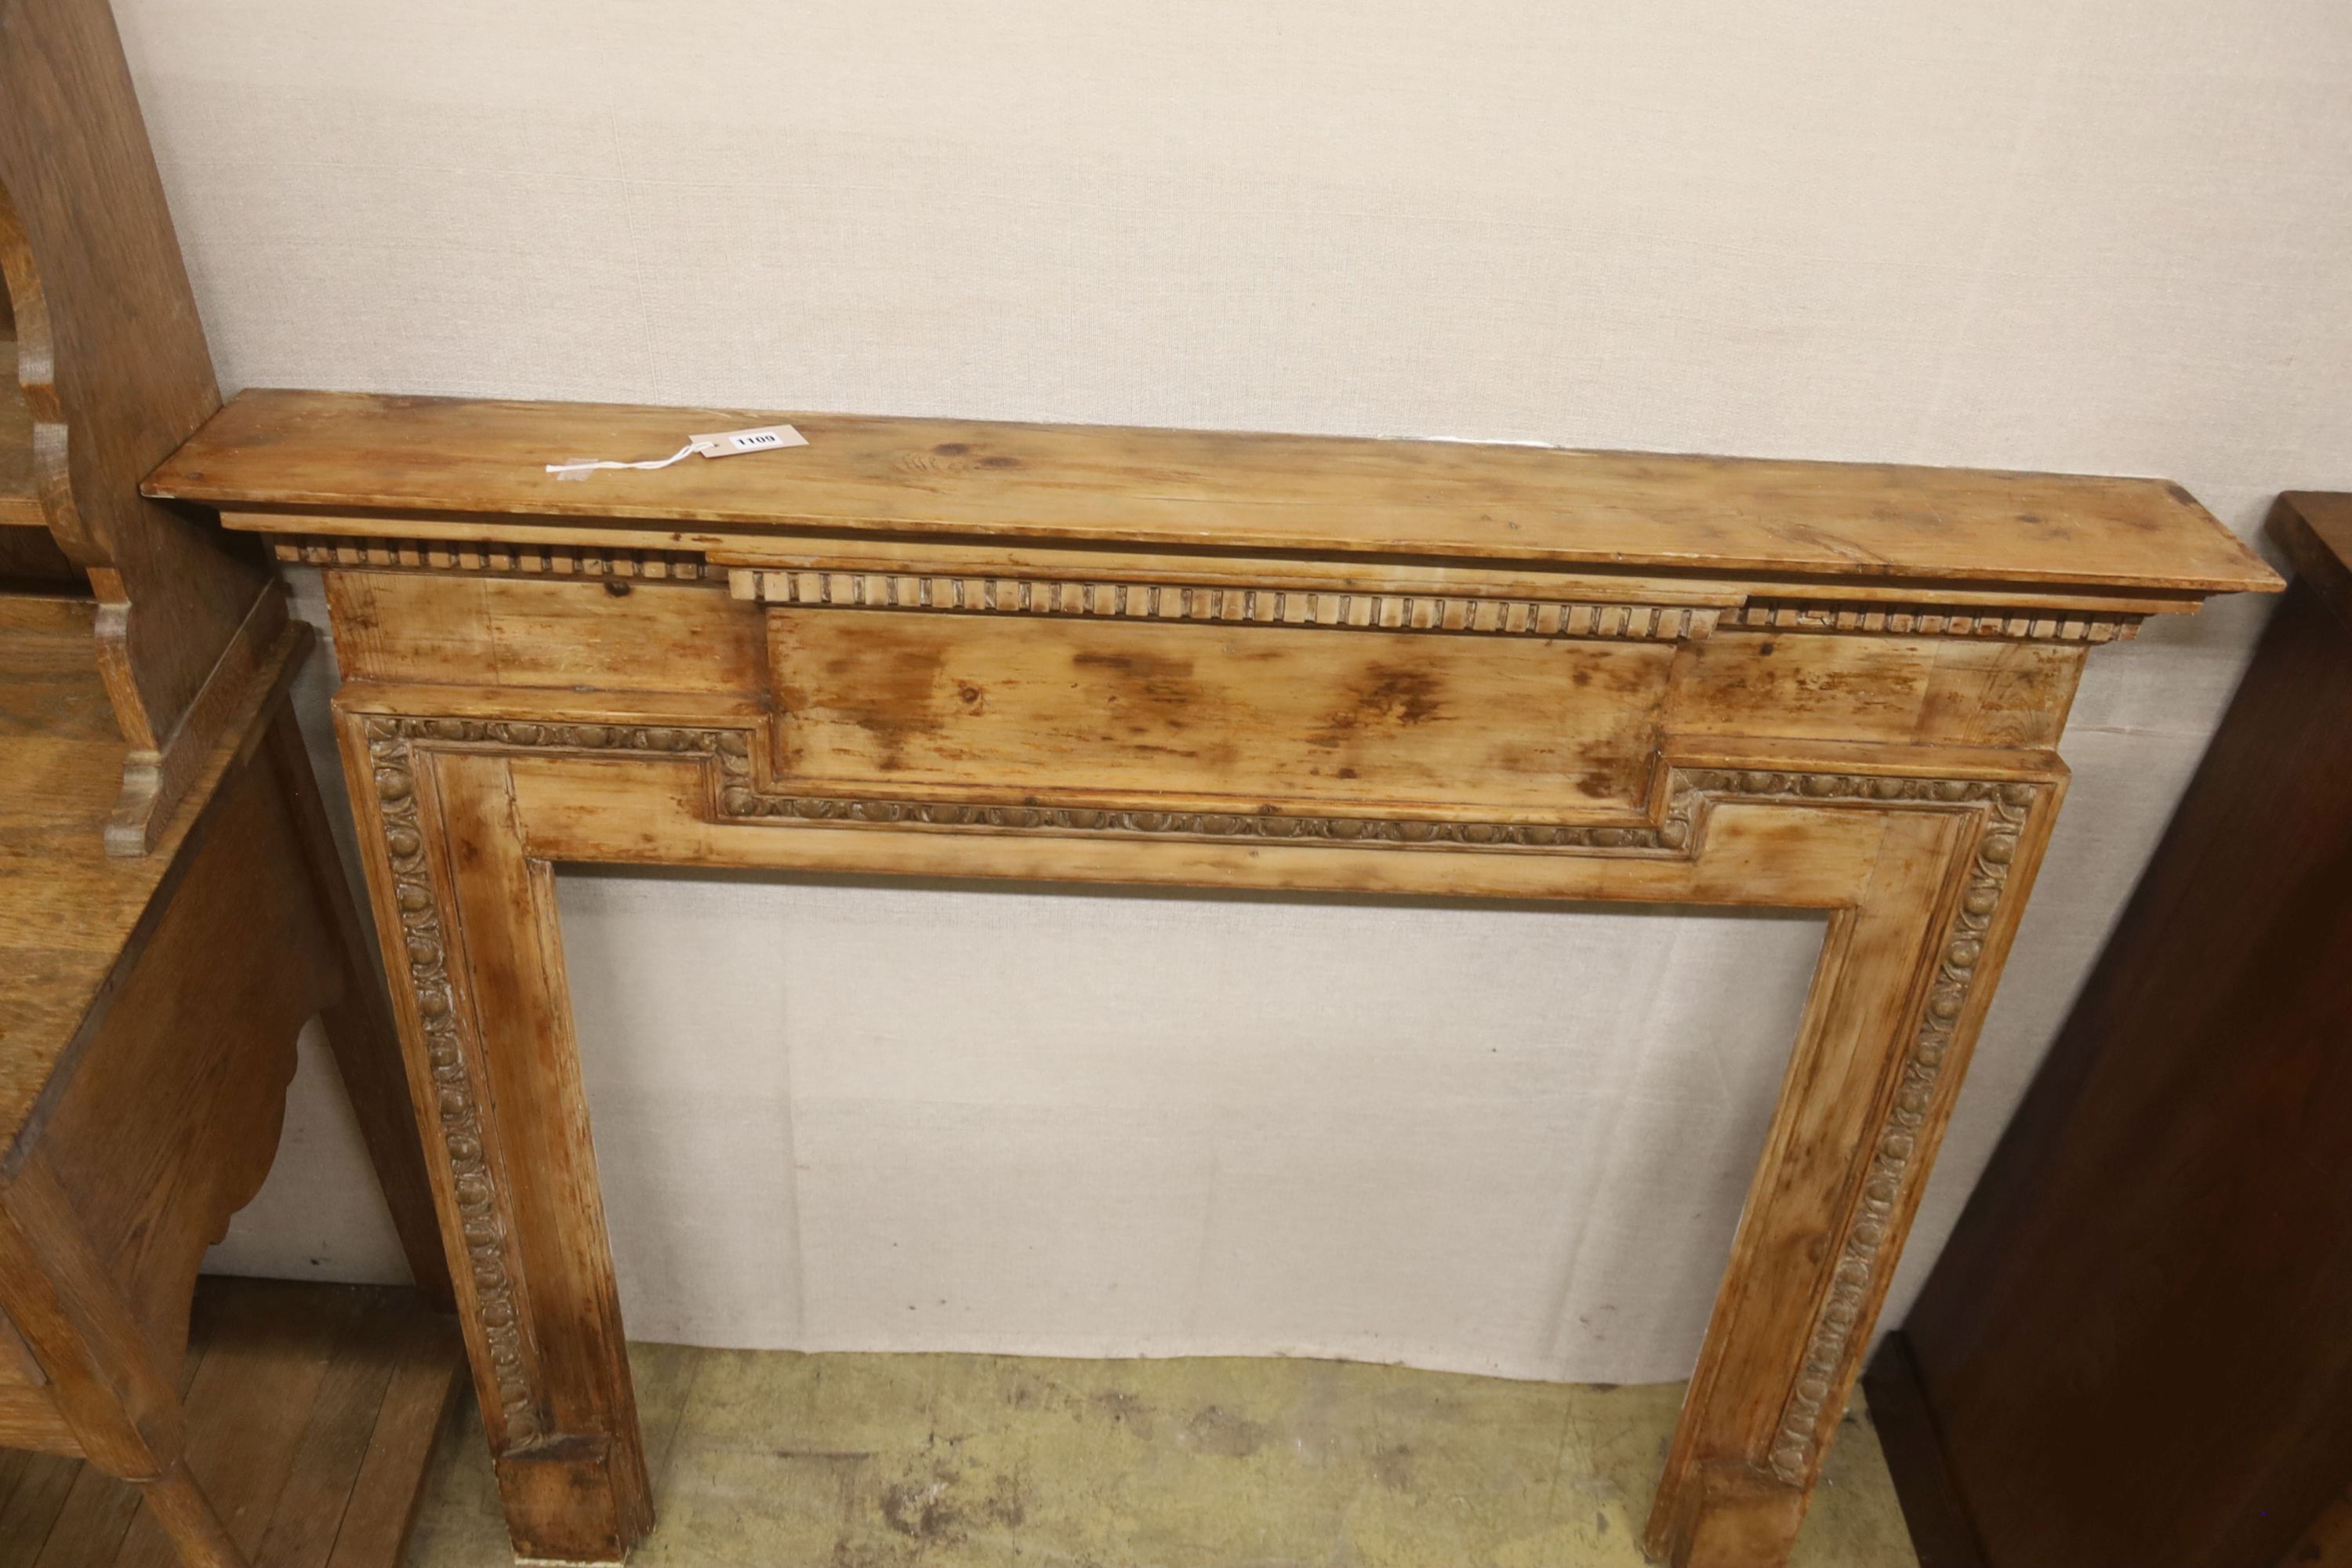 An early 20th century pine fire surround, length 135cm, height 111cm